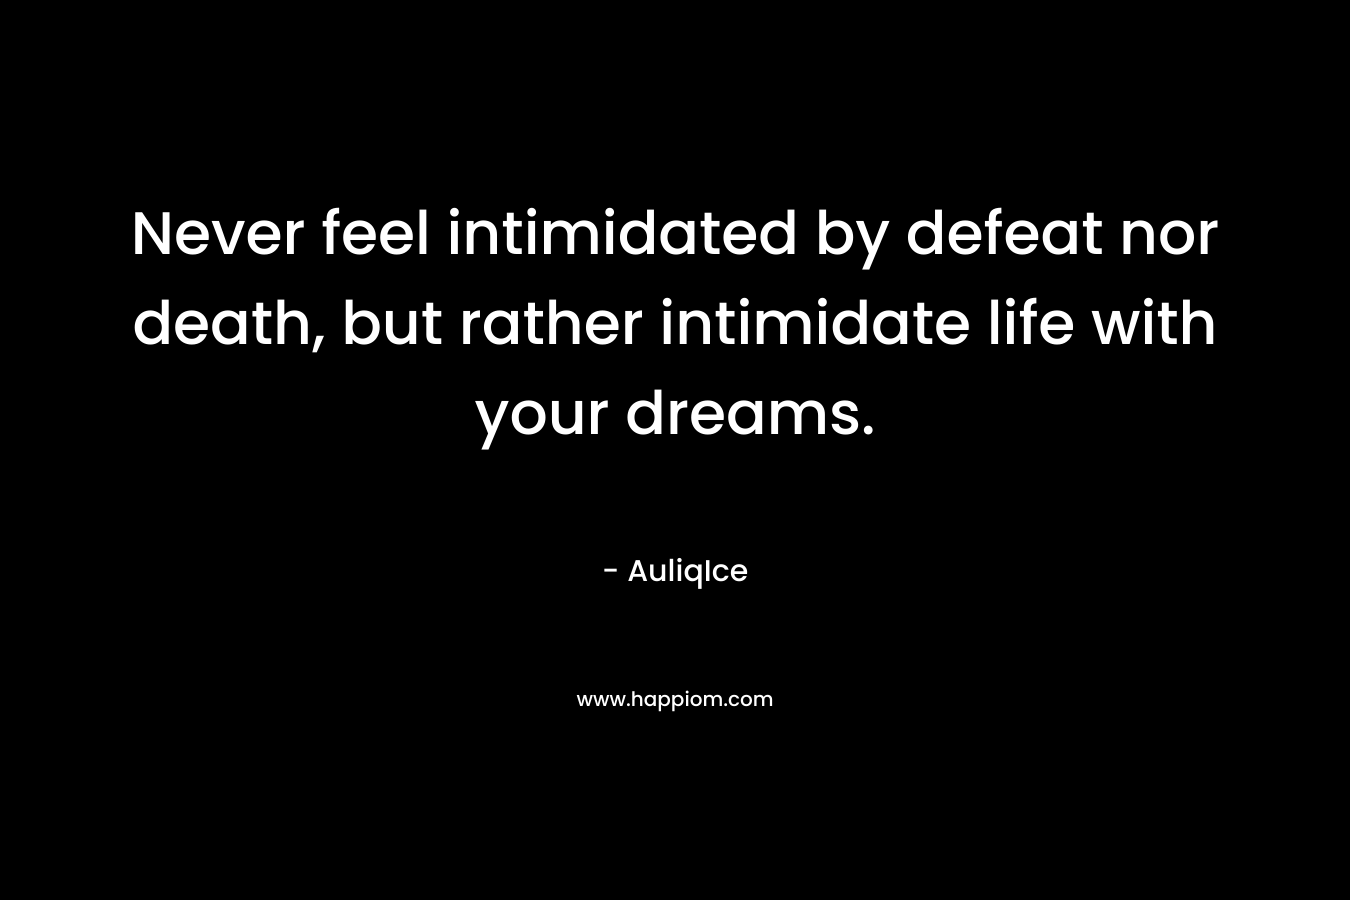 Never feel intimidated by defeat nor death, but rather intimidate life with your dreams.